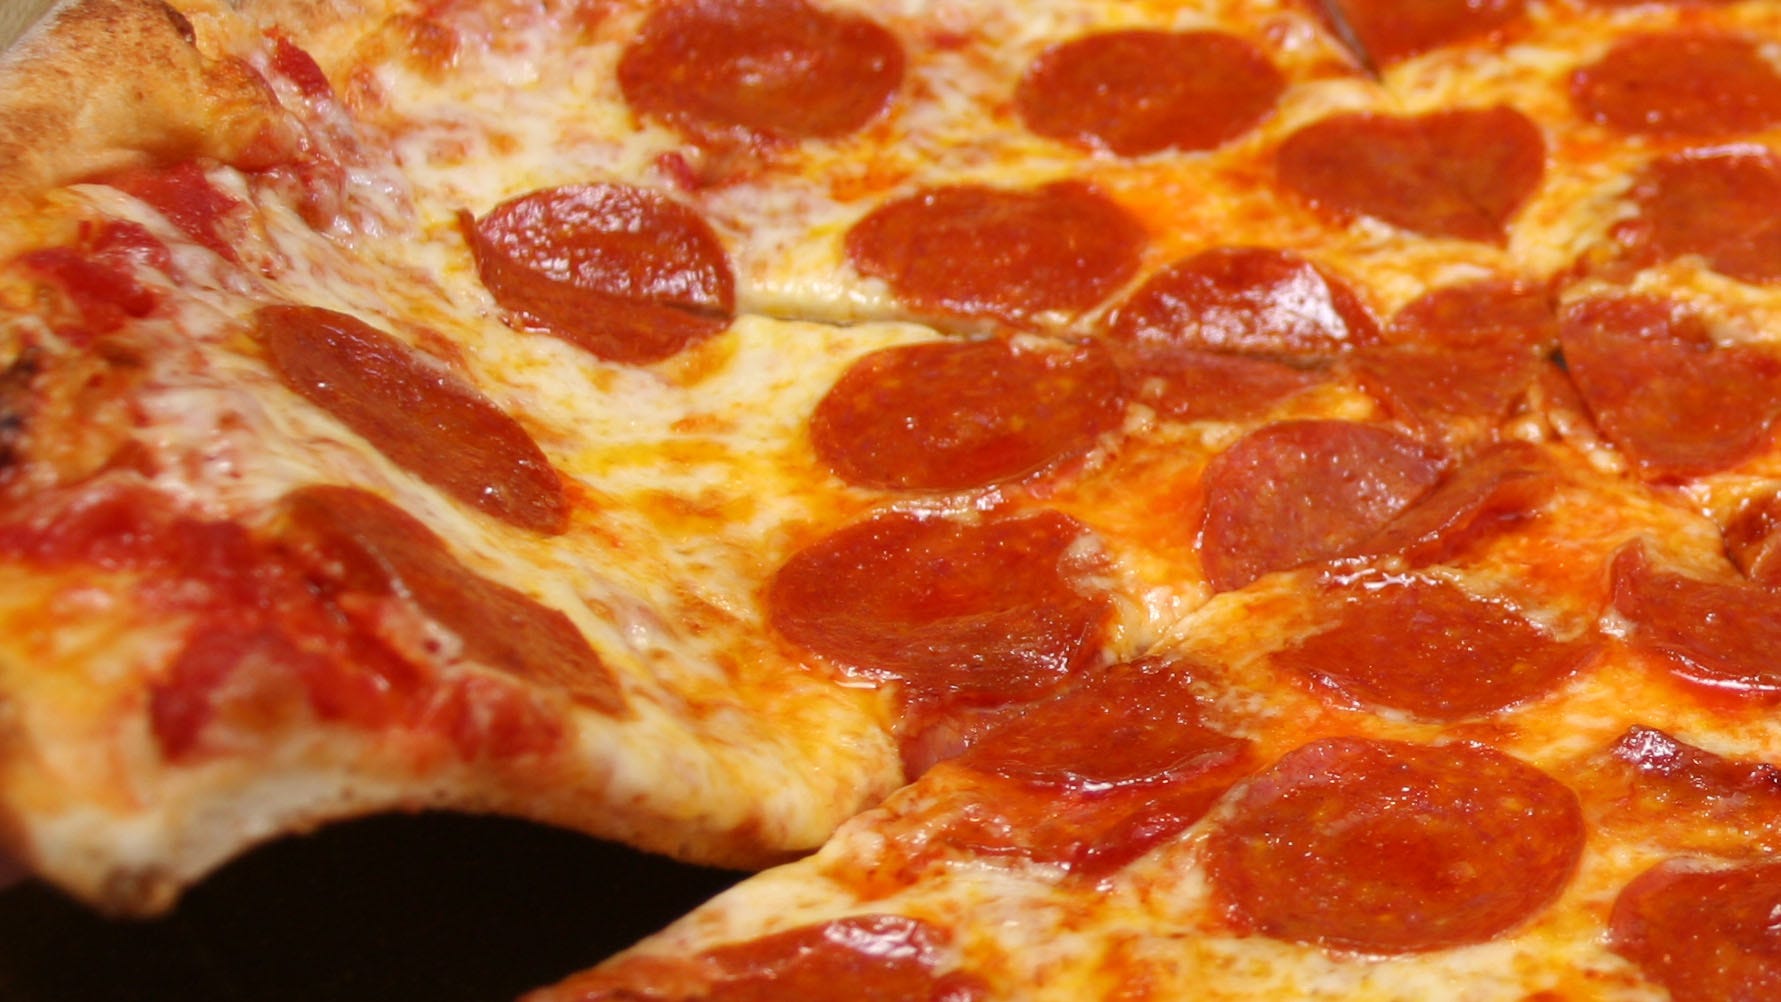 Pennsylvania man holds hostage pizza delivery driver who forgot his drink: police